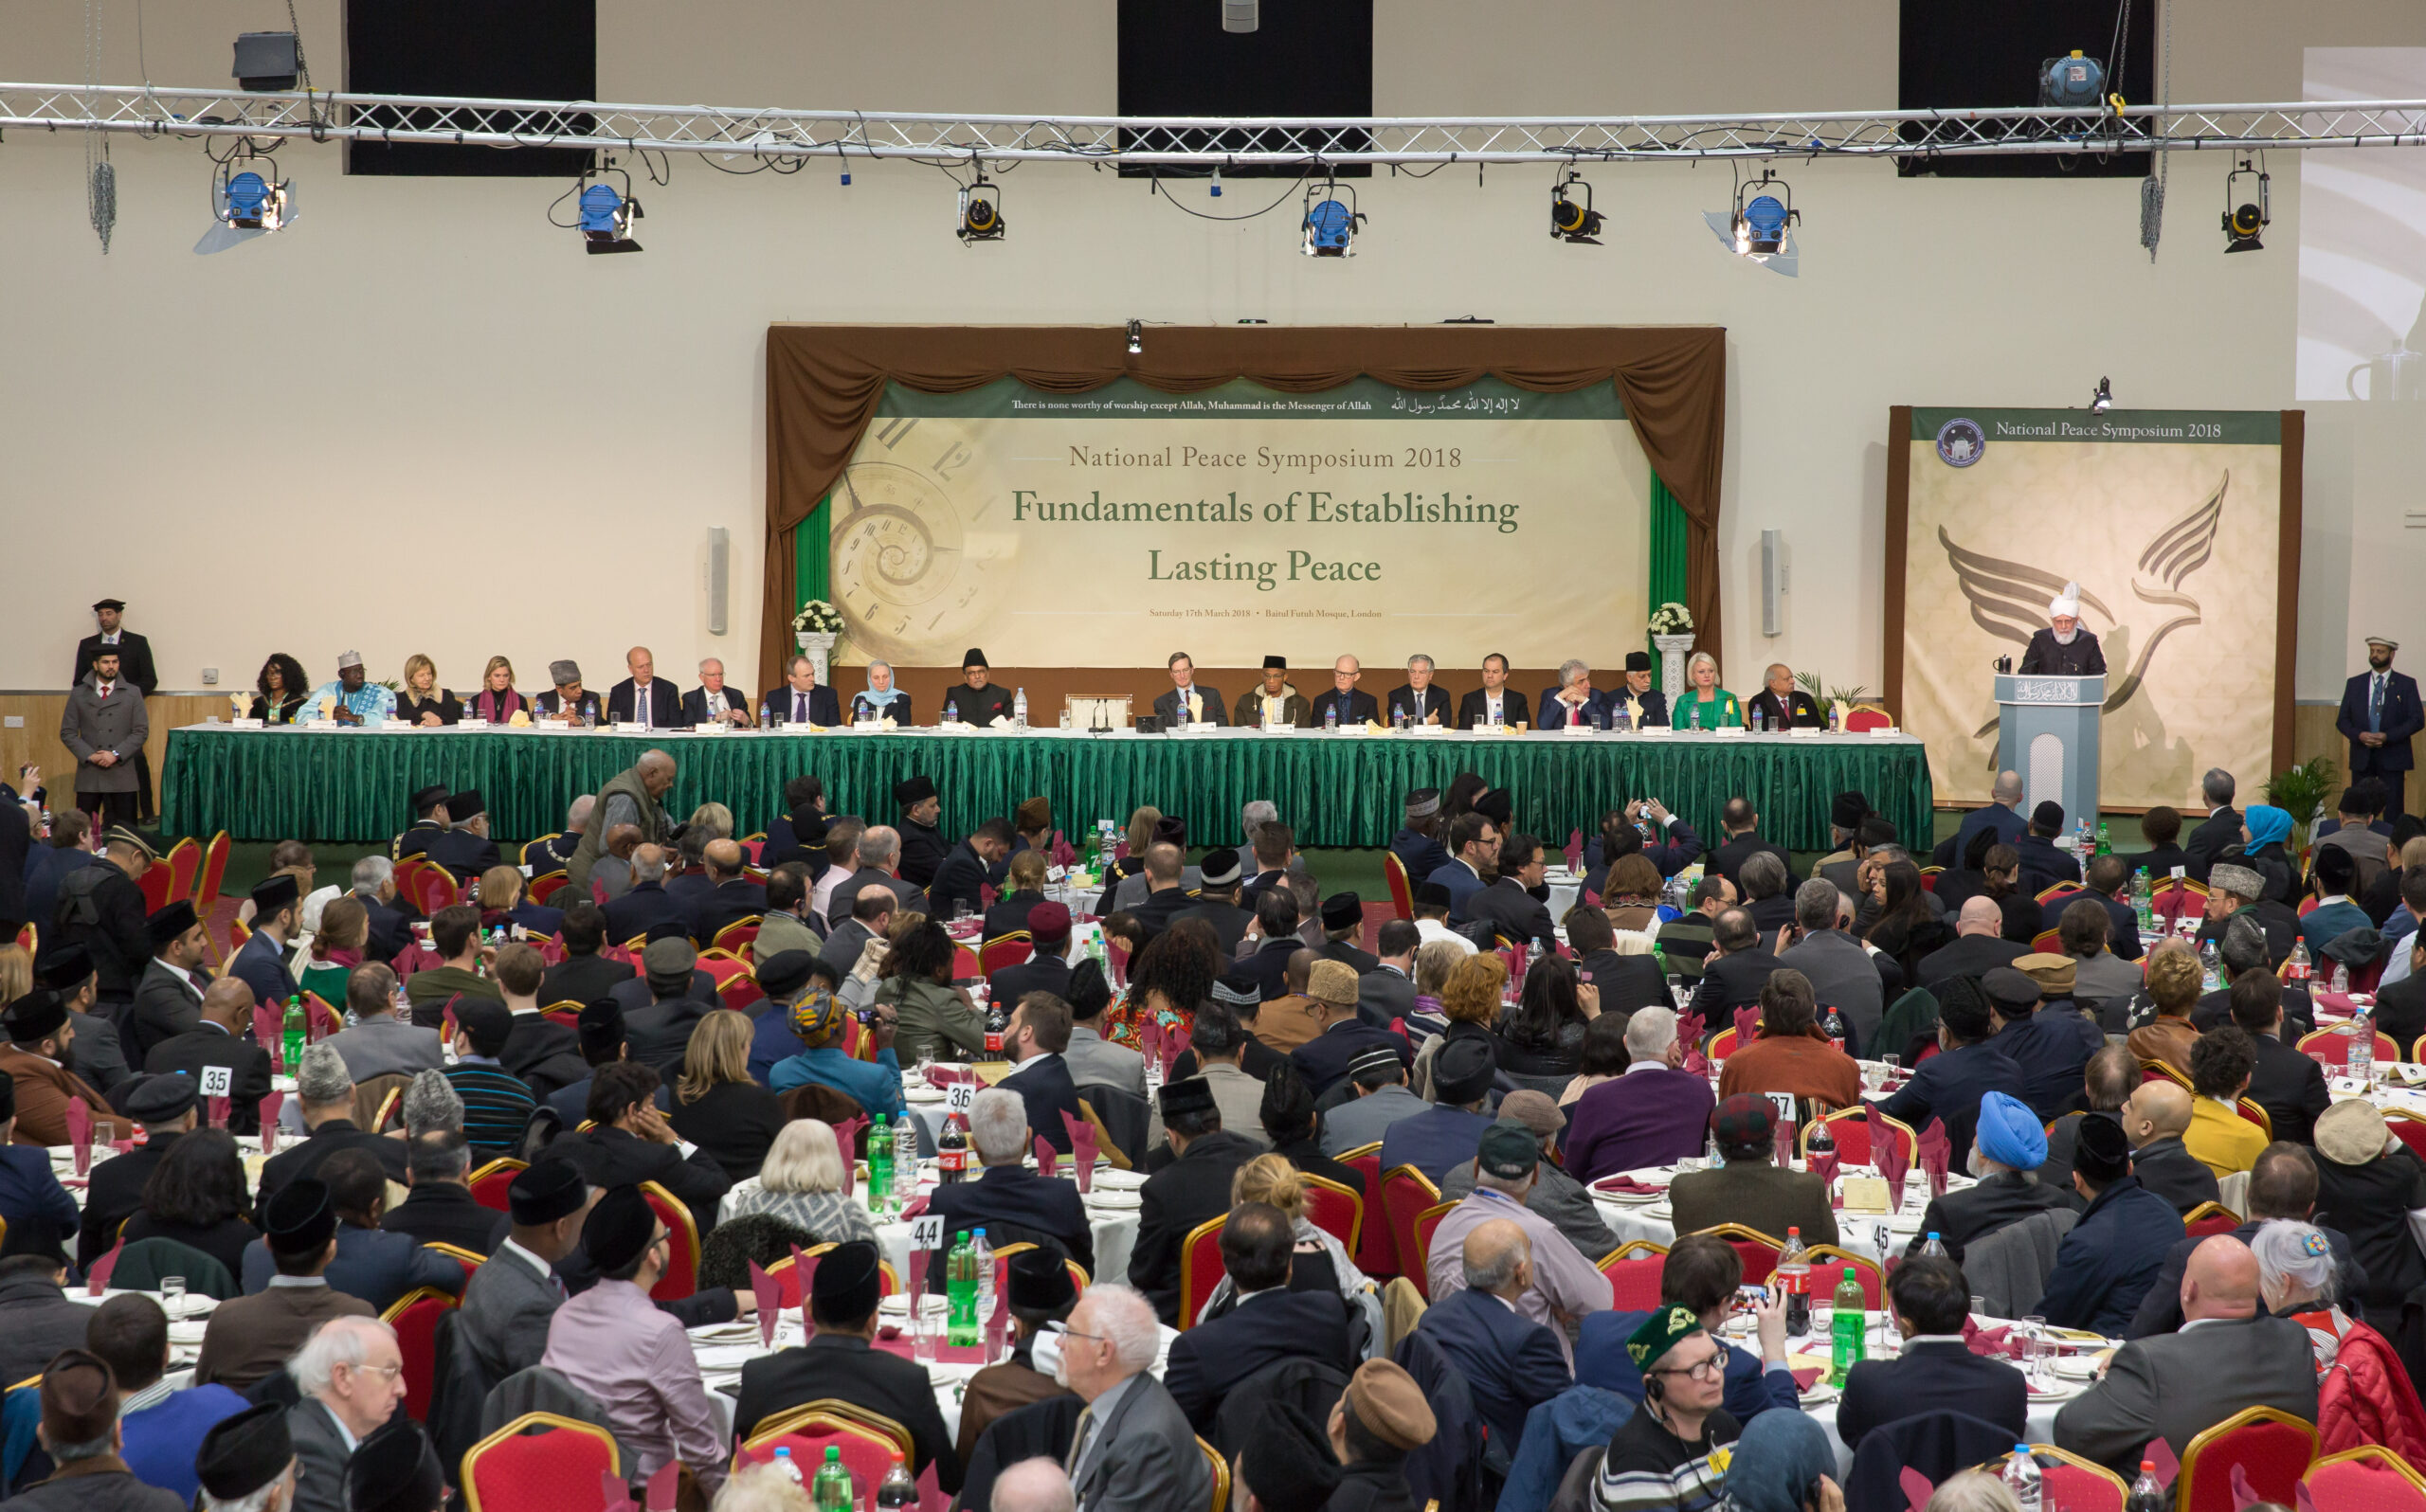 Head of Ahmadiyya Muslim Community says Time has come to Stop Blaming only Muslims for the World’s Problems